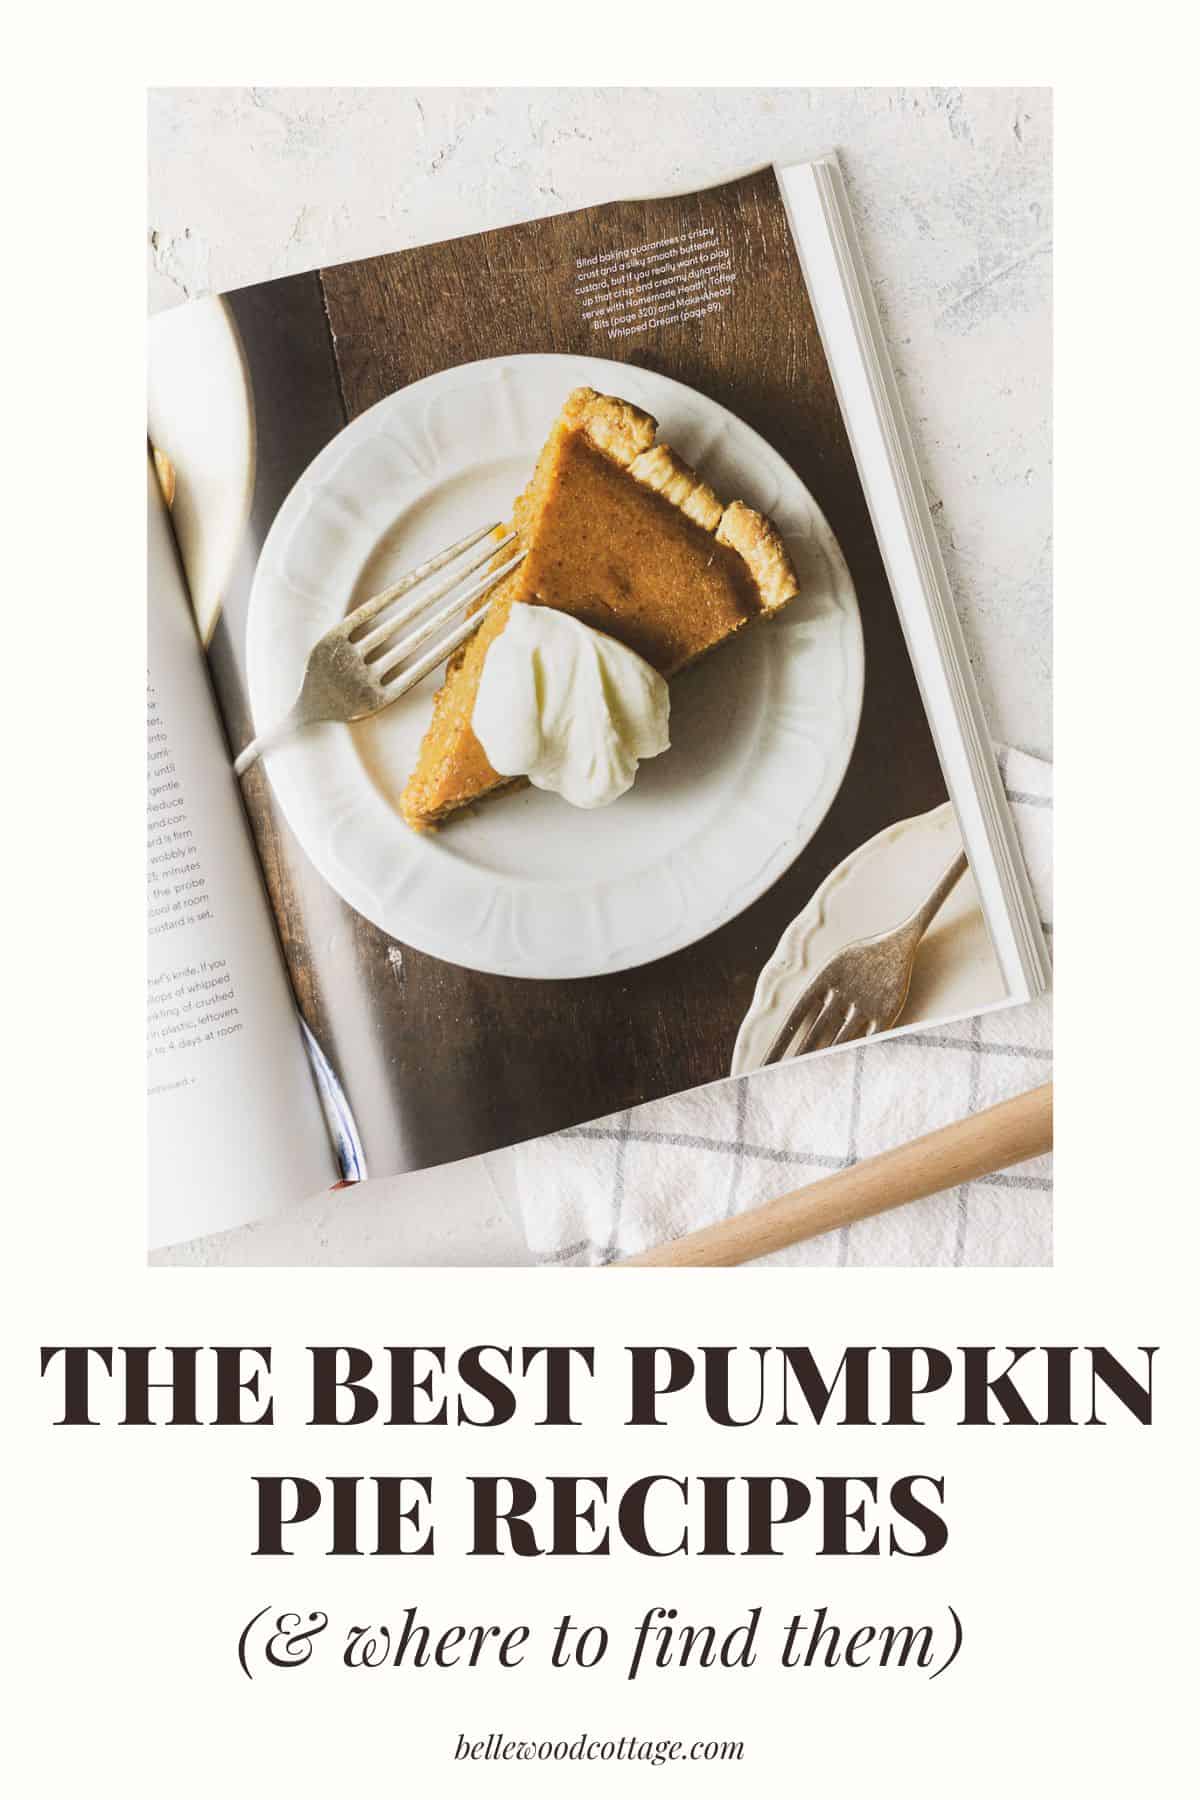 A photo of a book open to a page with a slice of pumpkin pie plus text, "The Best Pumpkin Pie Recipes (& where to find them)."